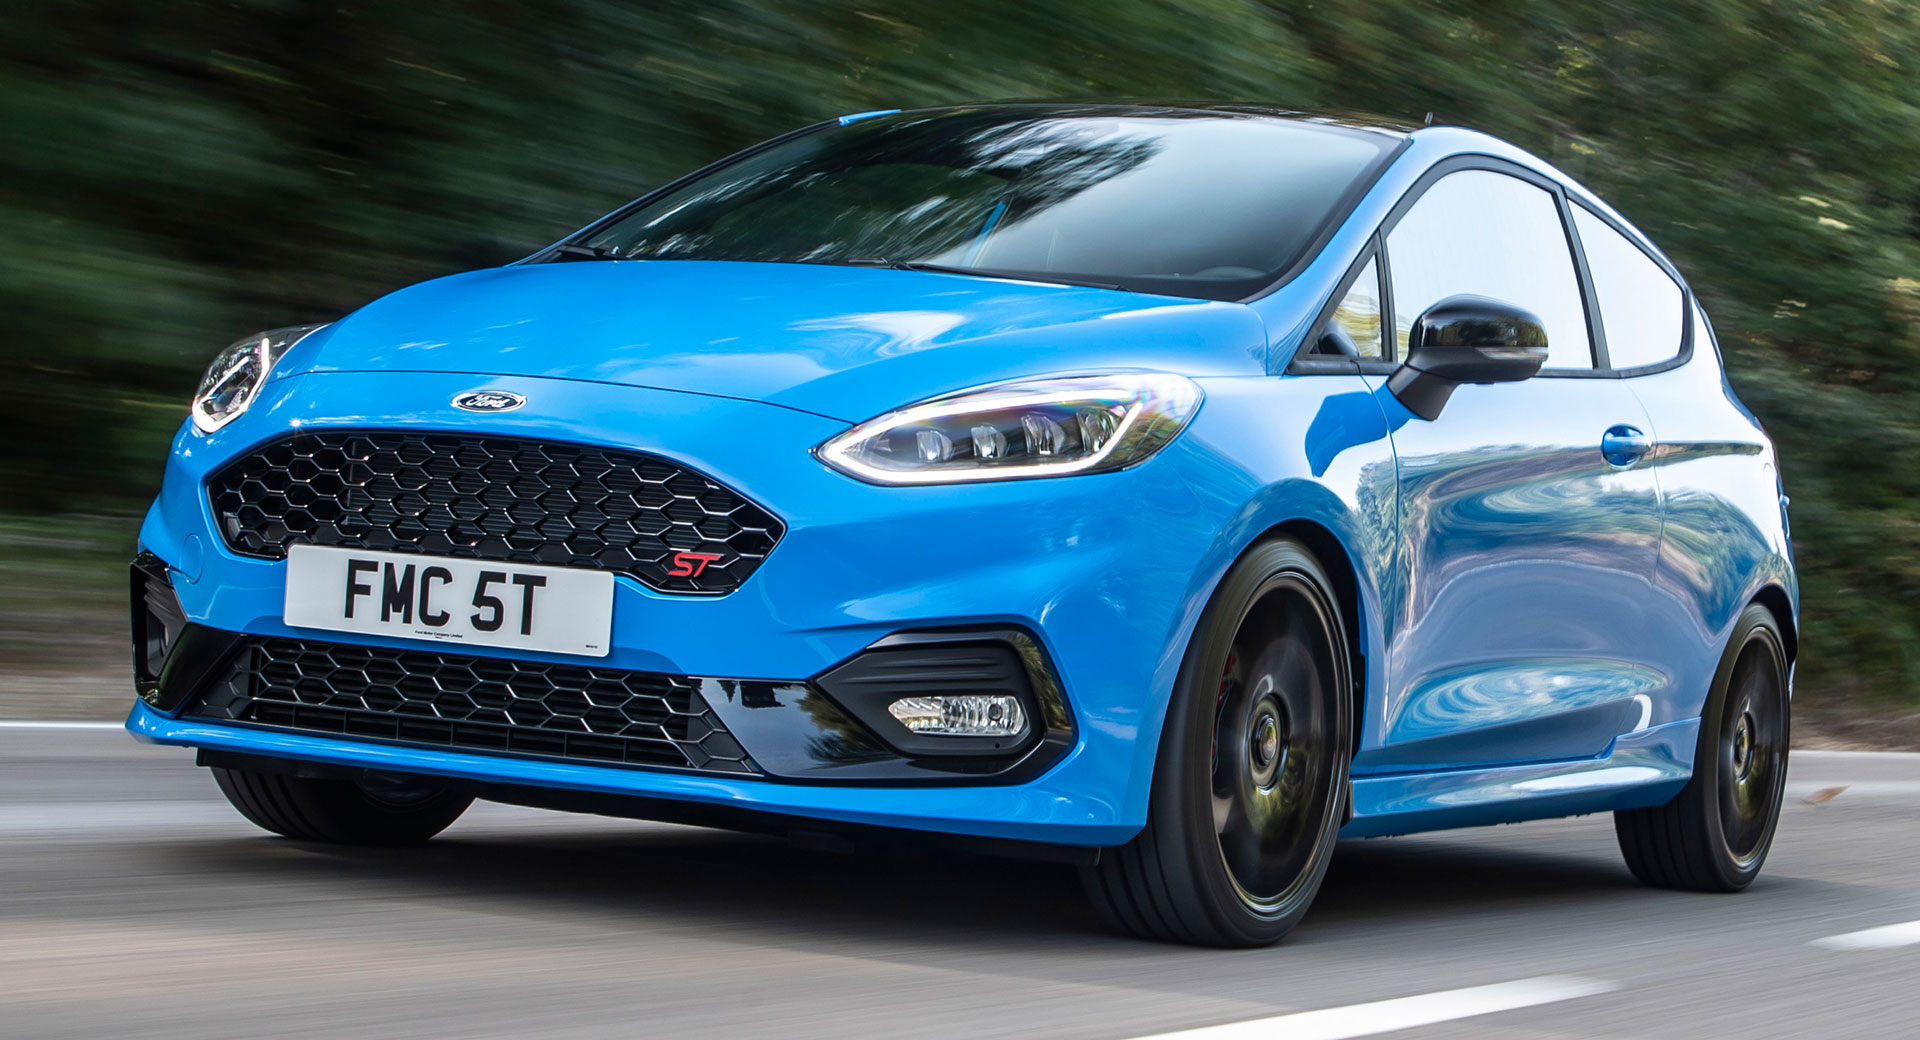 Production of the Ford Fiesta ends after nearly five decades